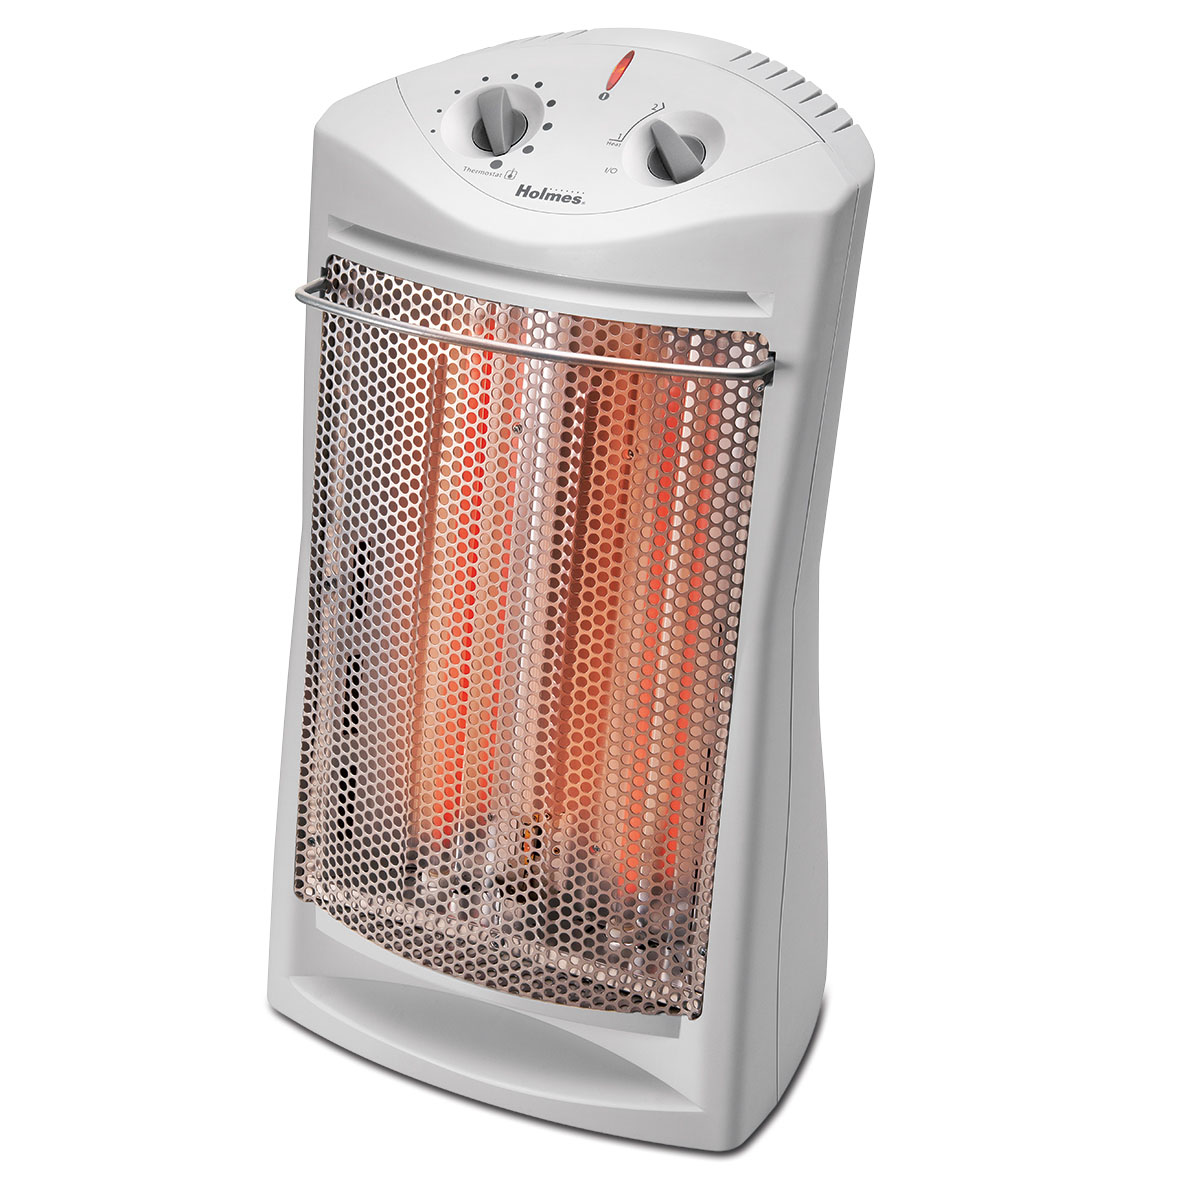 Lifesource infrared heater tower user manual 2016